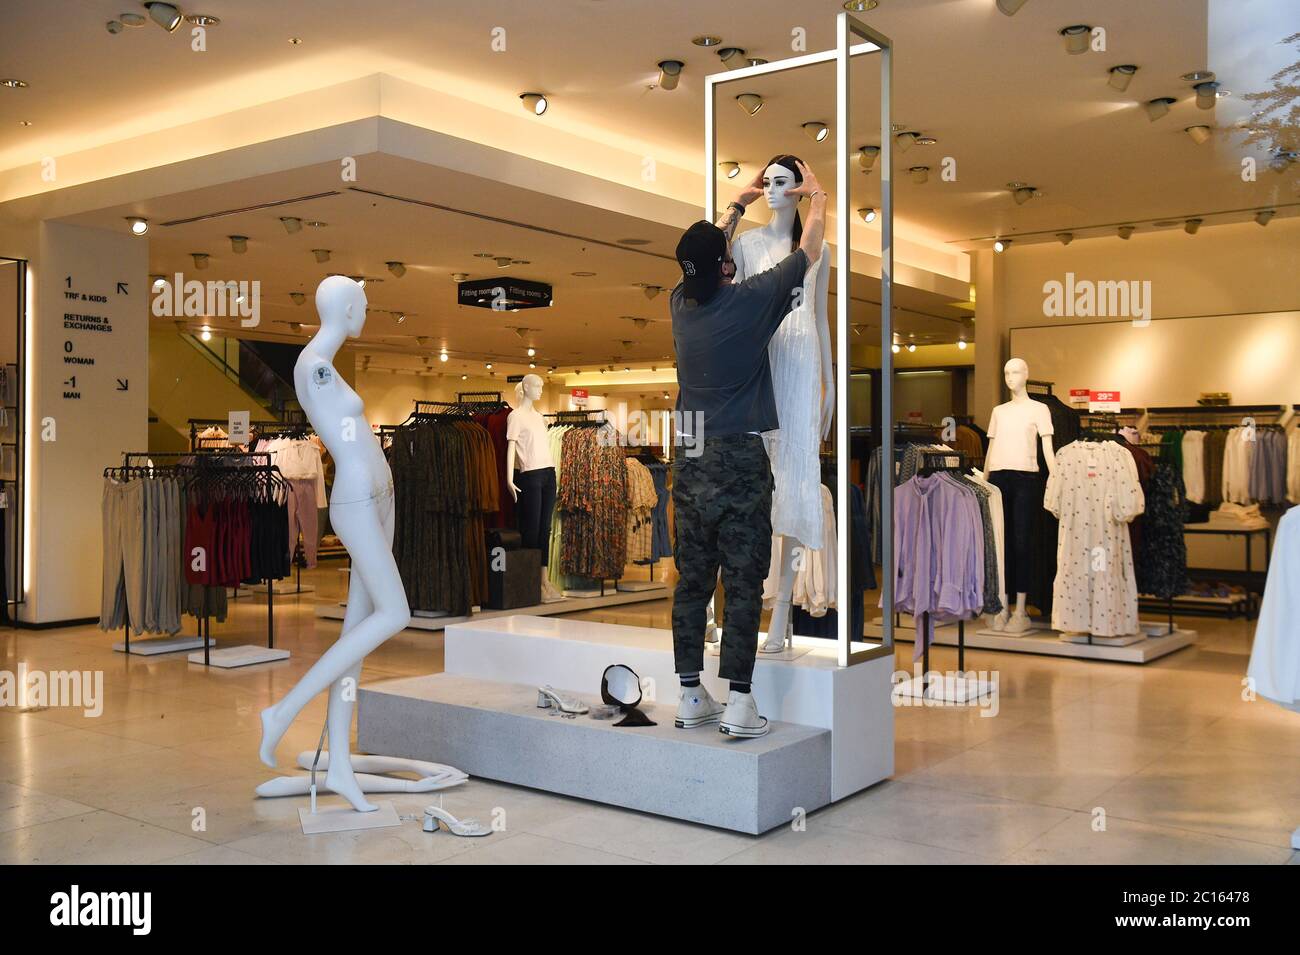 A worker dresses a mannequin in a Zara store on Oxford Street, London,  ahead of the re-opening of non-essential retailers in England on June 15  Stock Photo - Alamy